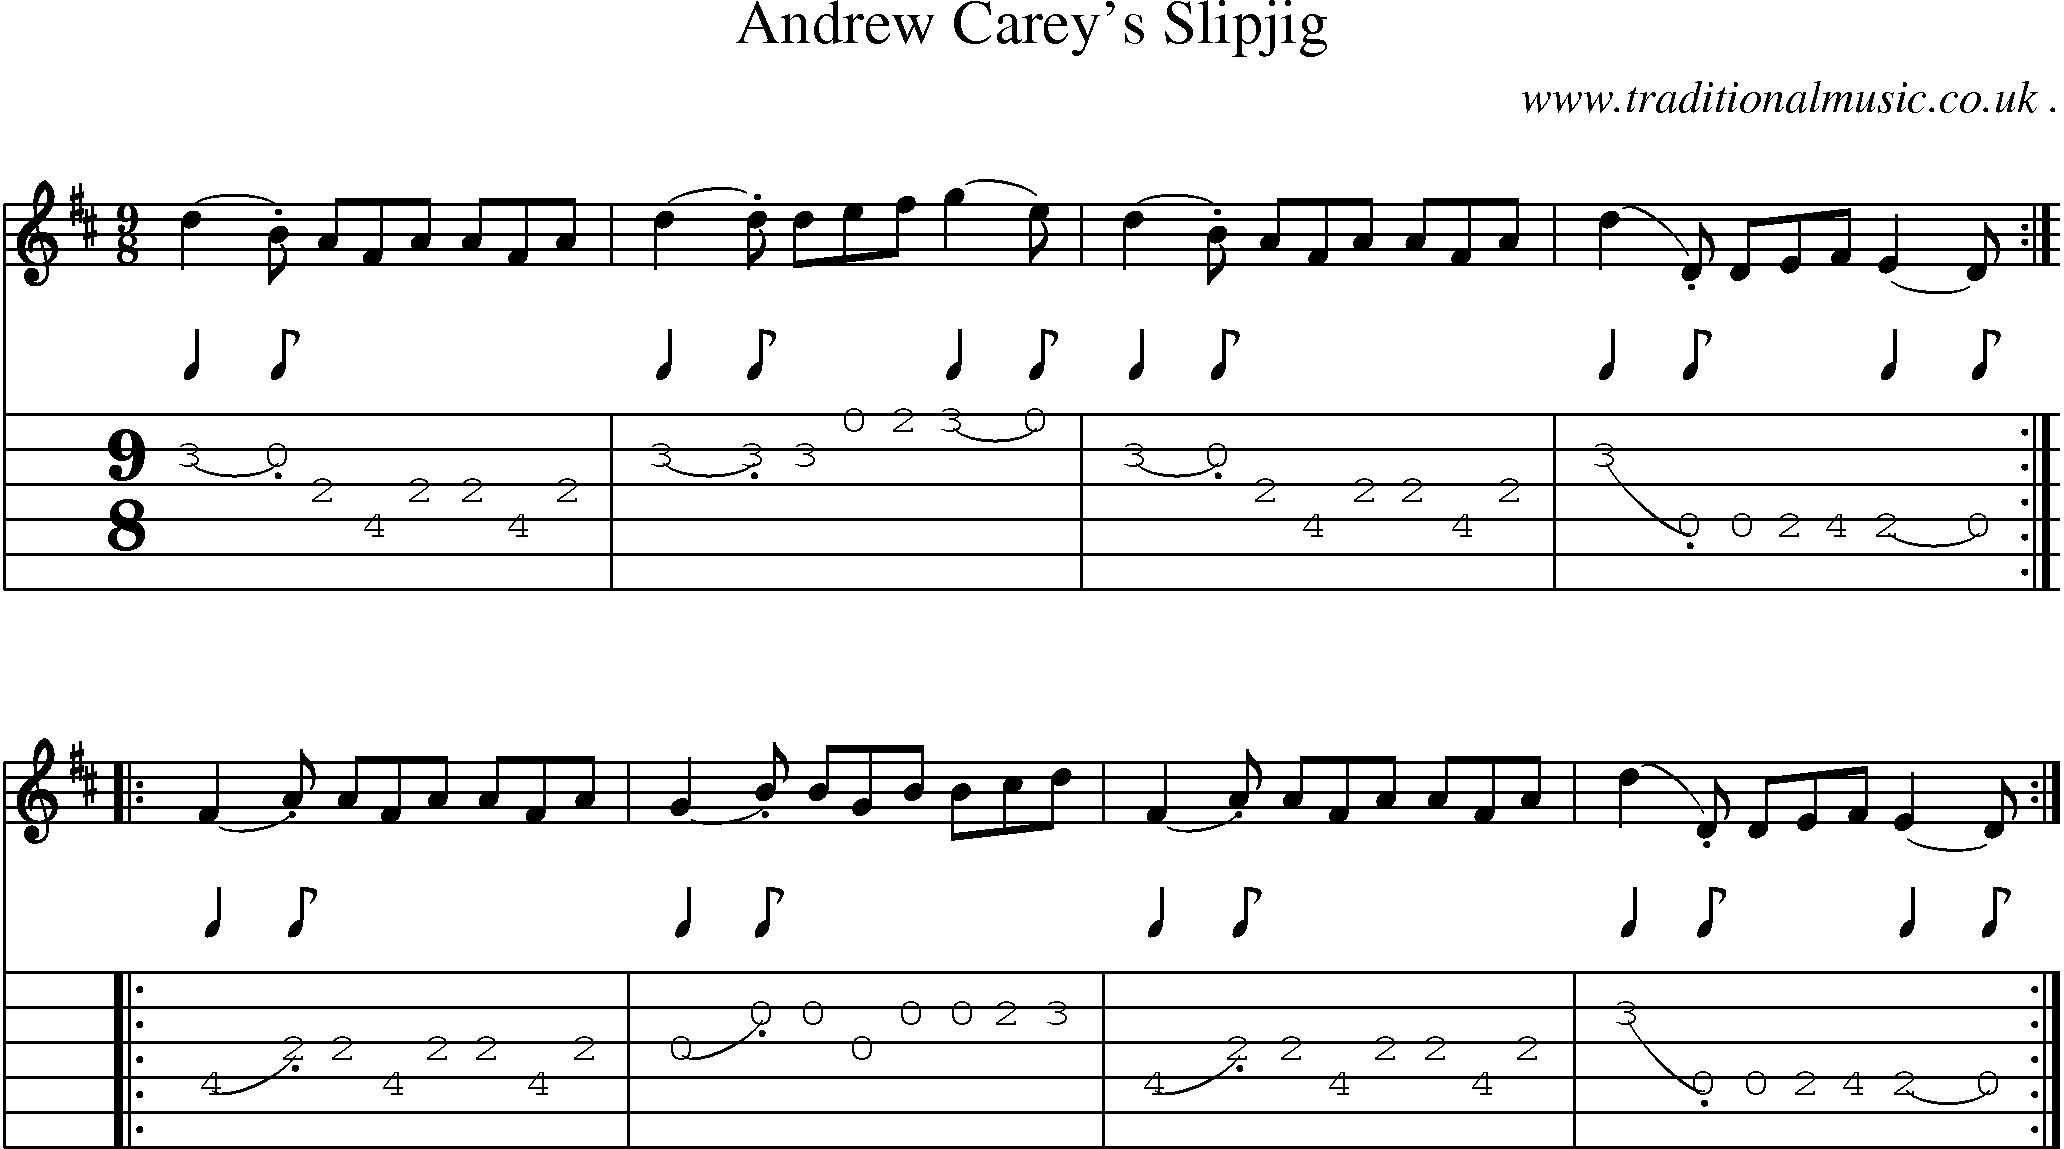 Sheet-Music and Guitar Tabs for Andrew Careys Slipjig